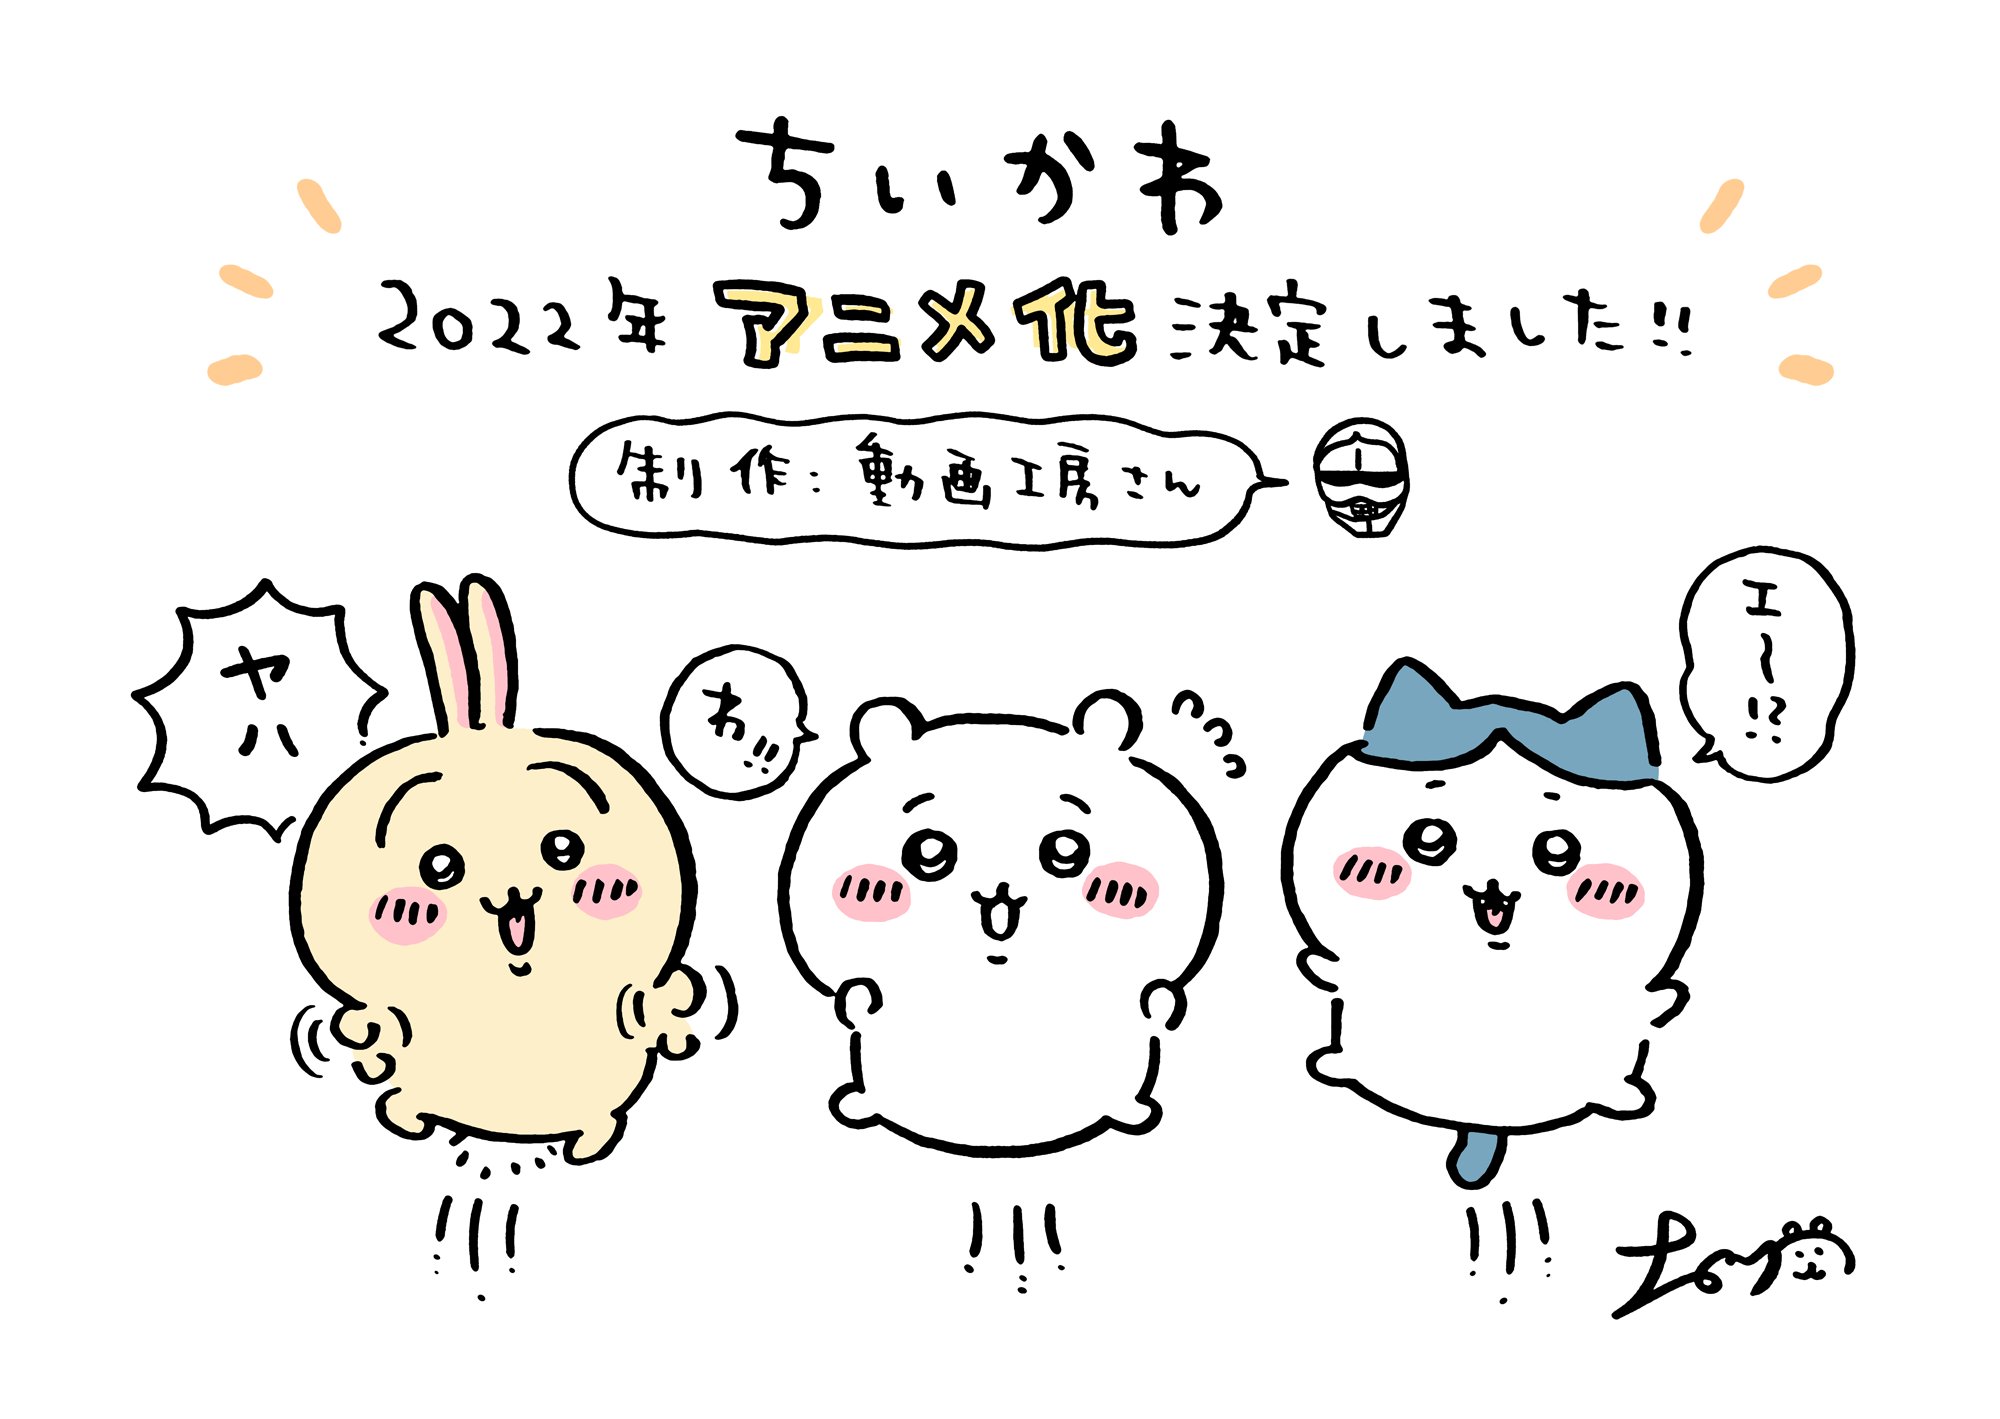 A promotional image illustrated by Nagano announcing that the Chiikawa Twitter manga is being adapted into an anime with production by Doga Kobo. The image features cute critters vaguely shaped like a bunny, a hamster, and a cat.